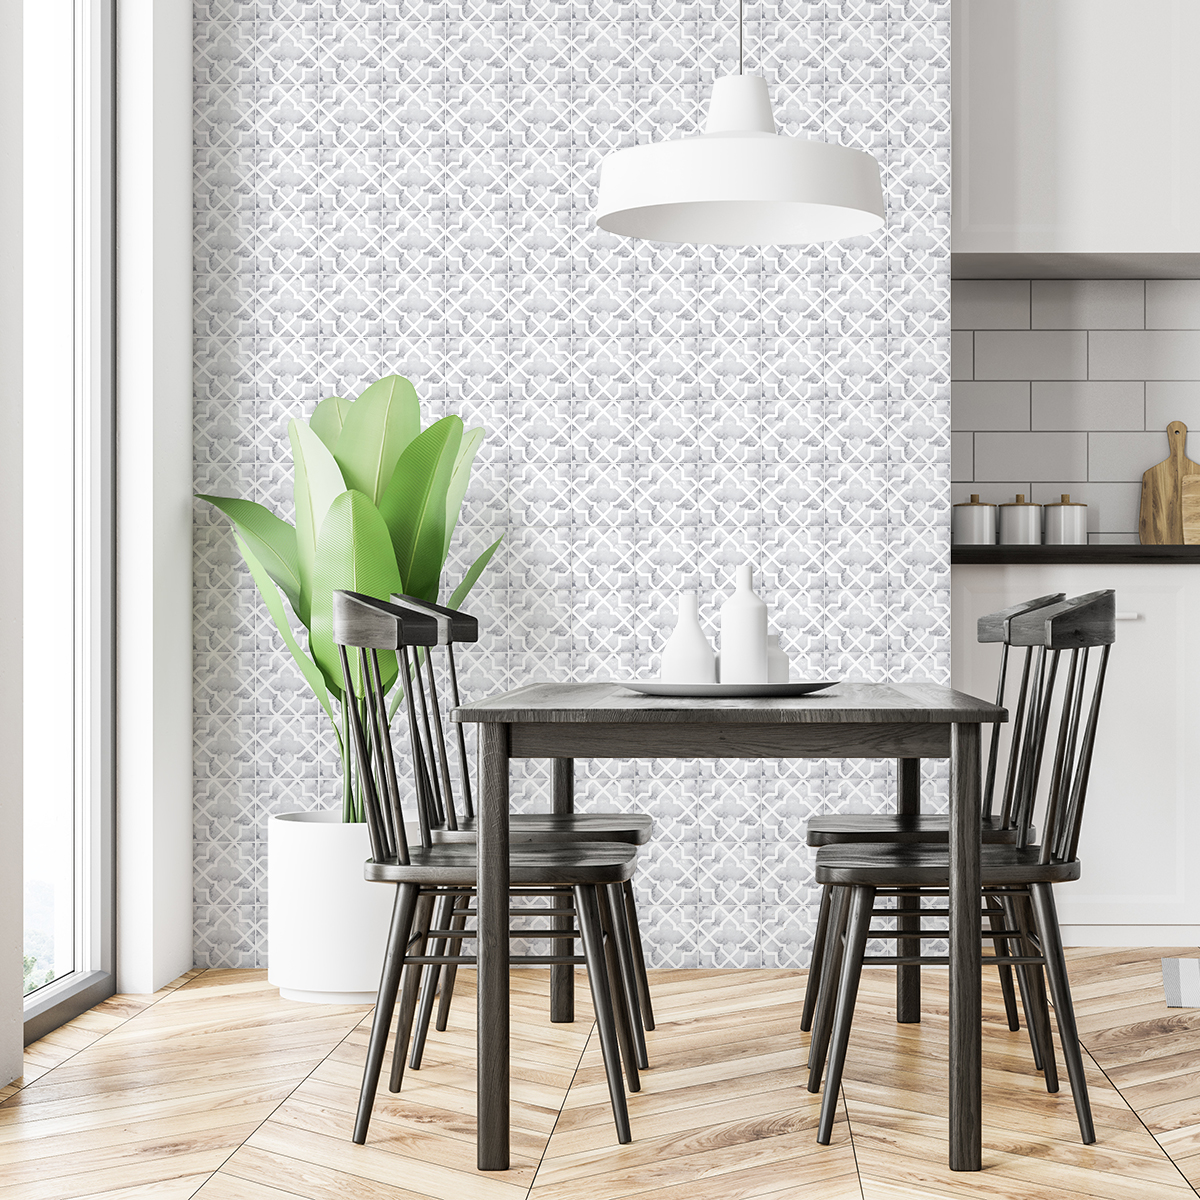 60 wall stickers cement tiles claritinia